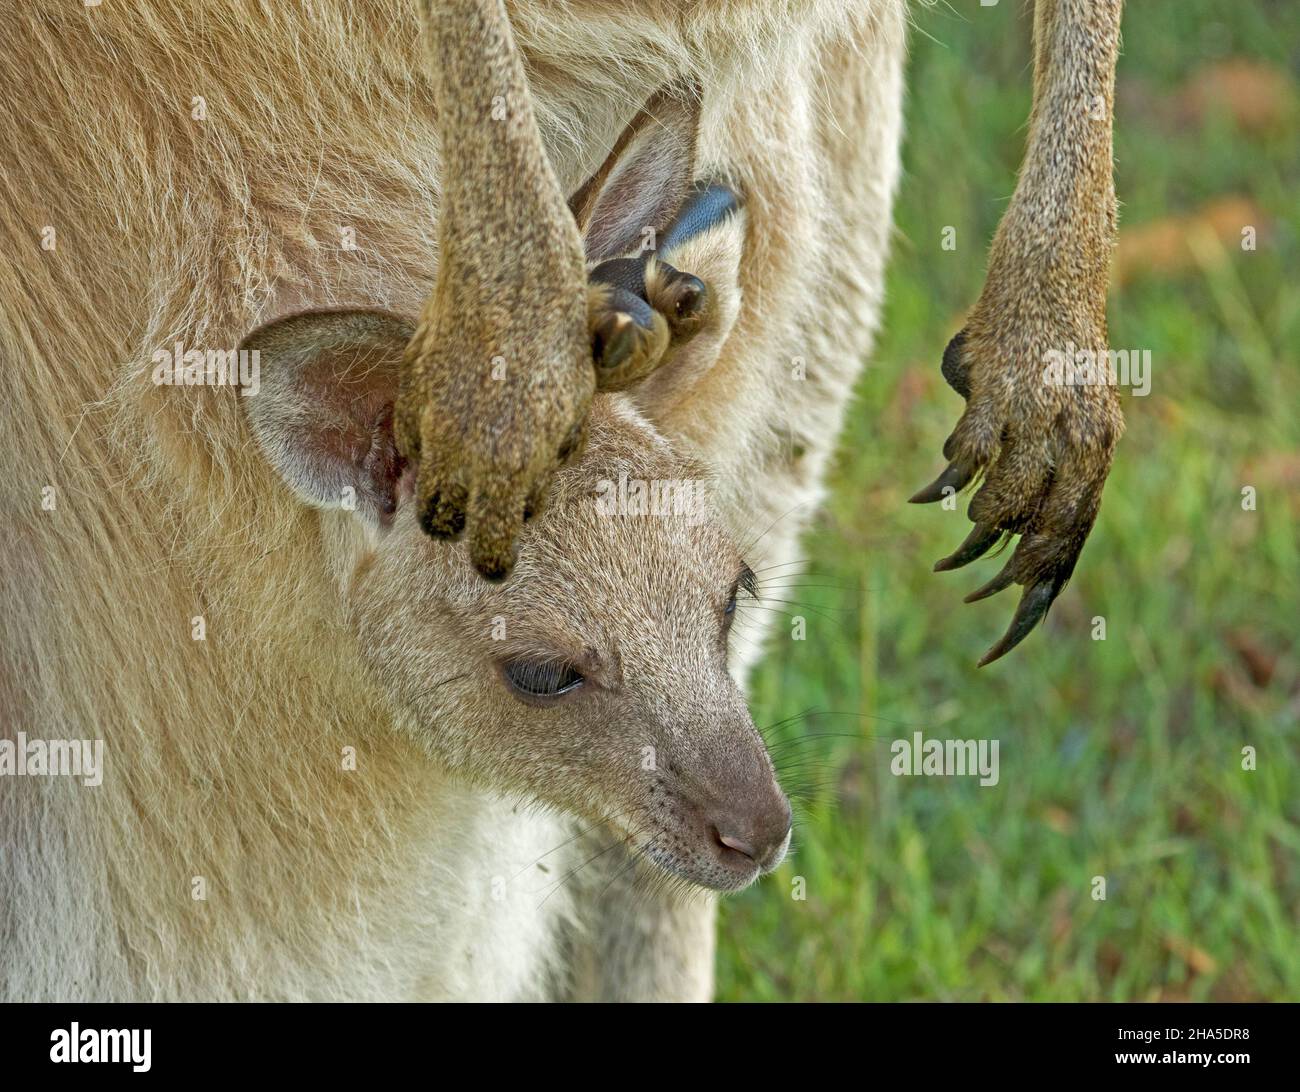 Face of tiny joey of Eastern grey kangaroo peering out of pouch with large paws and long claws of mother hanging beside it, in the wild in Australia Stock Photo